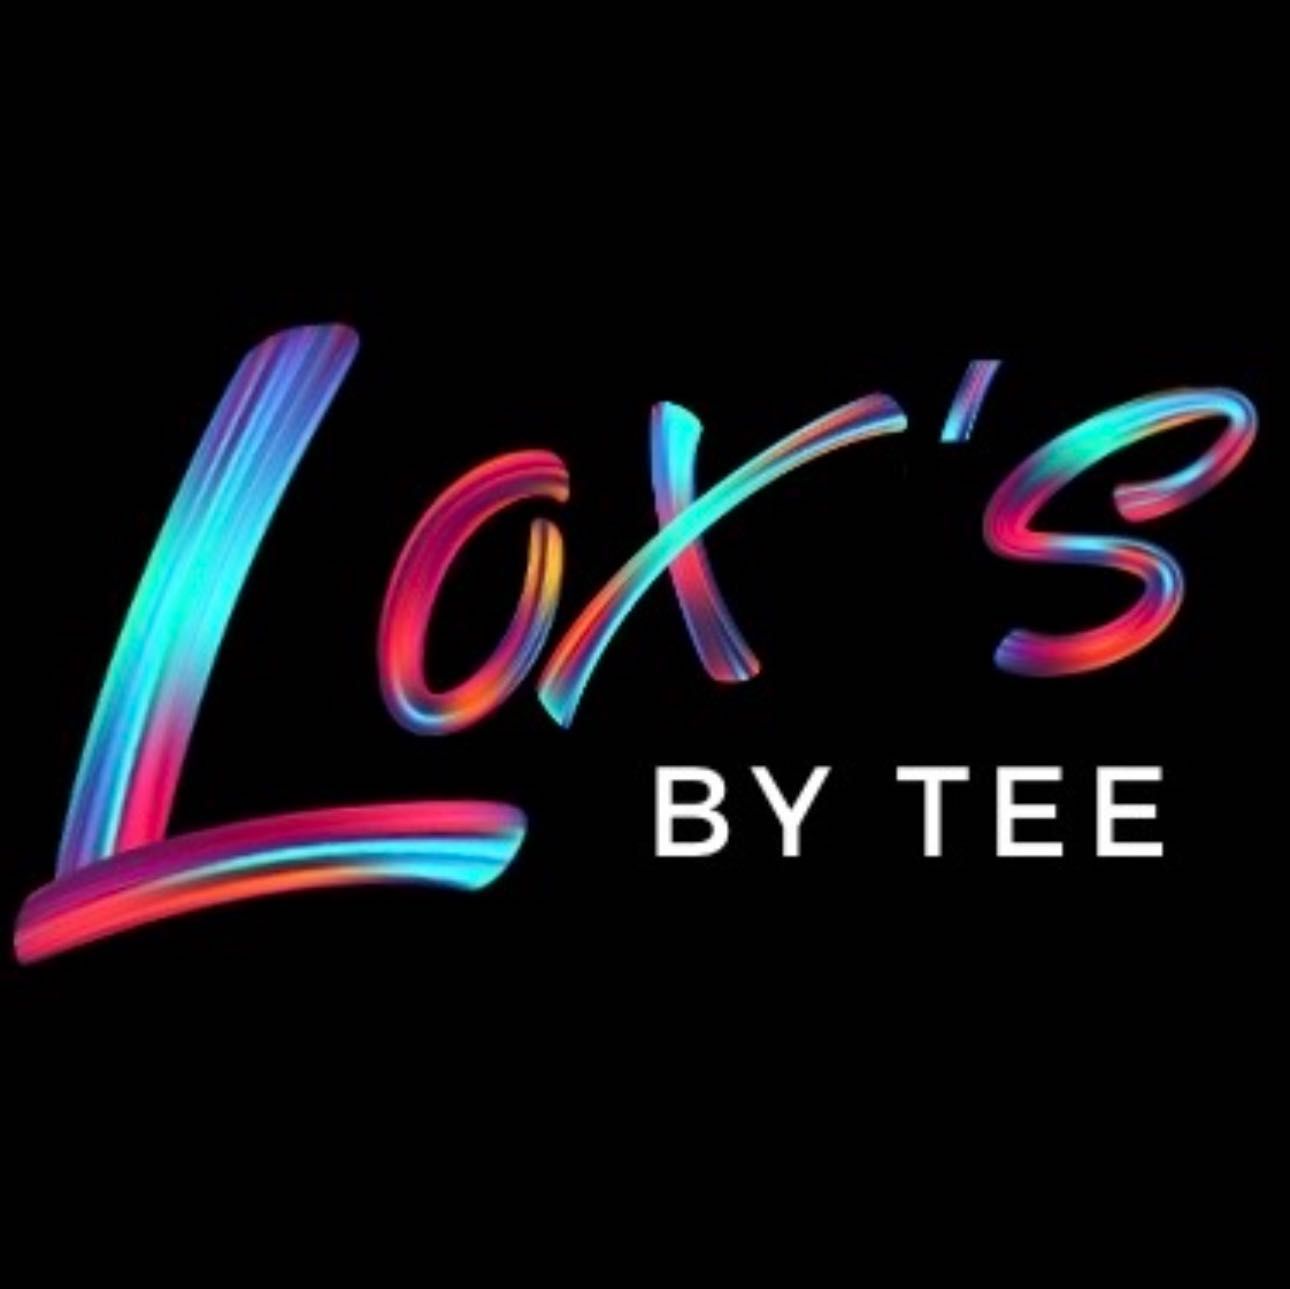 Lox’s by Tee, Highland Ave, Coventry, 02816